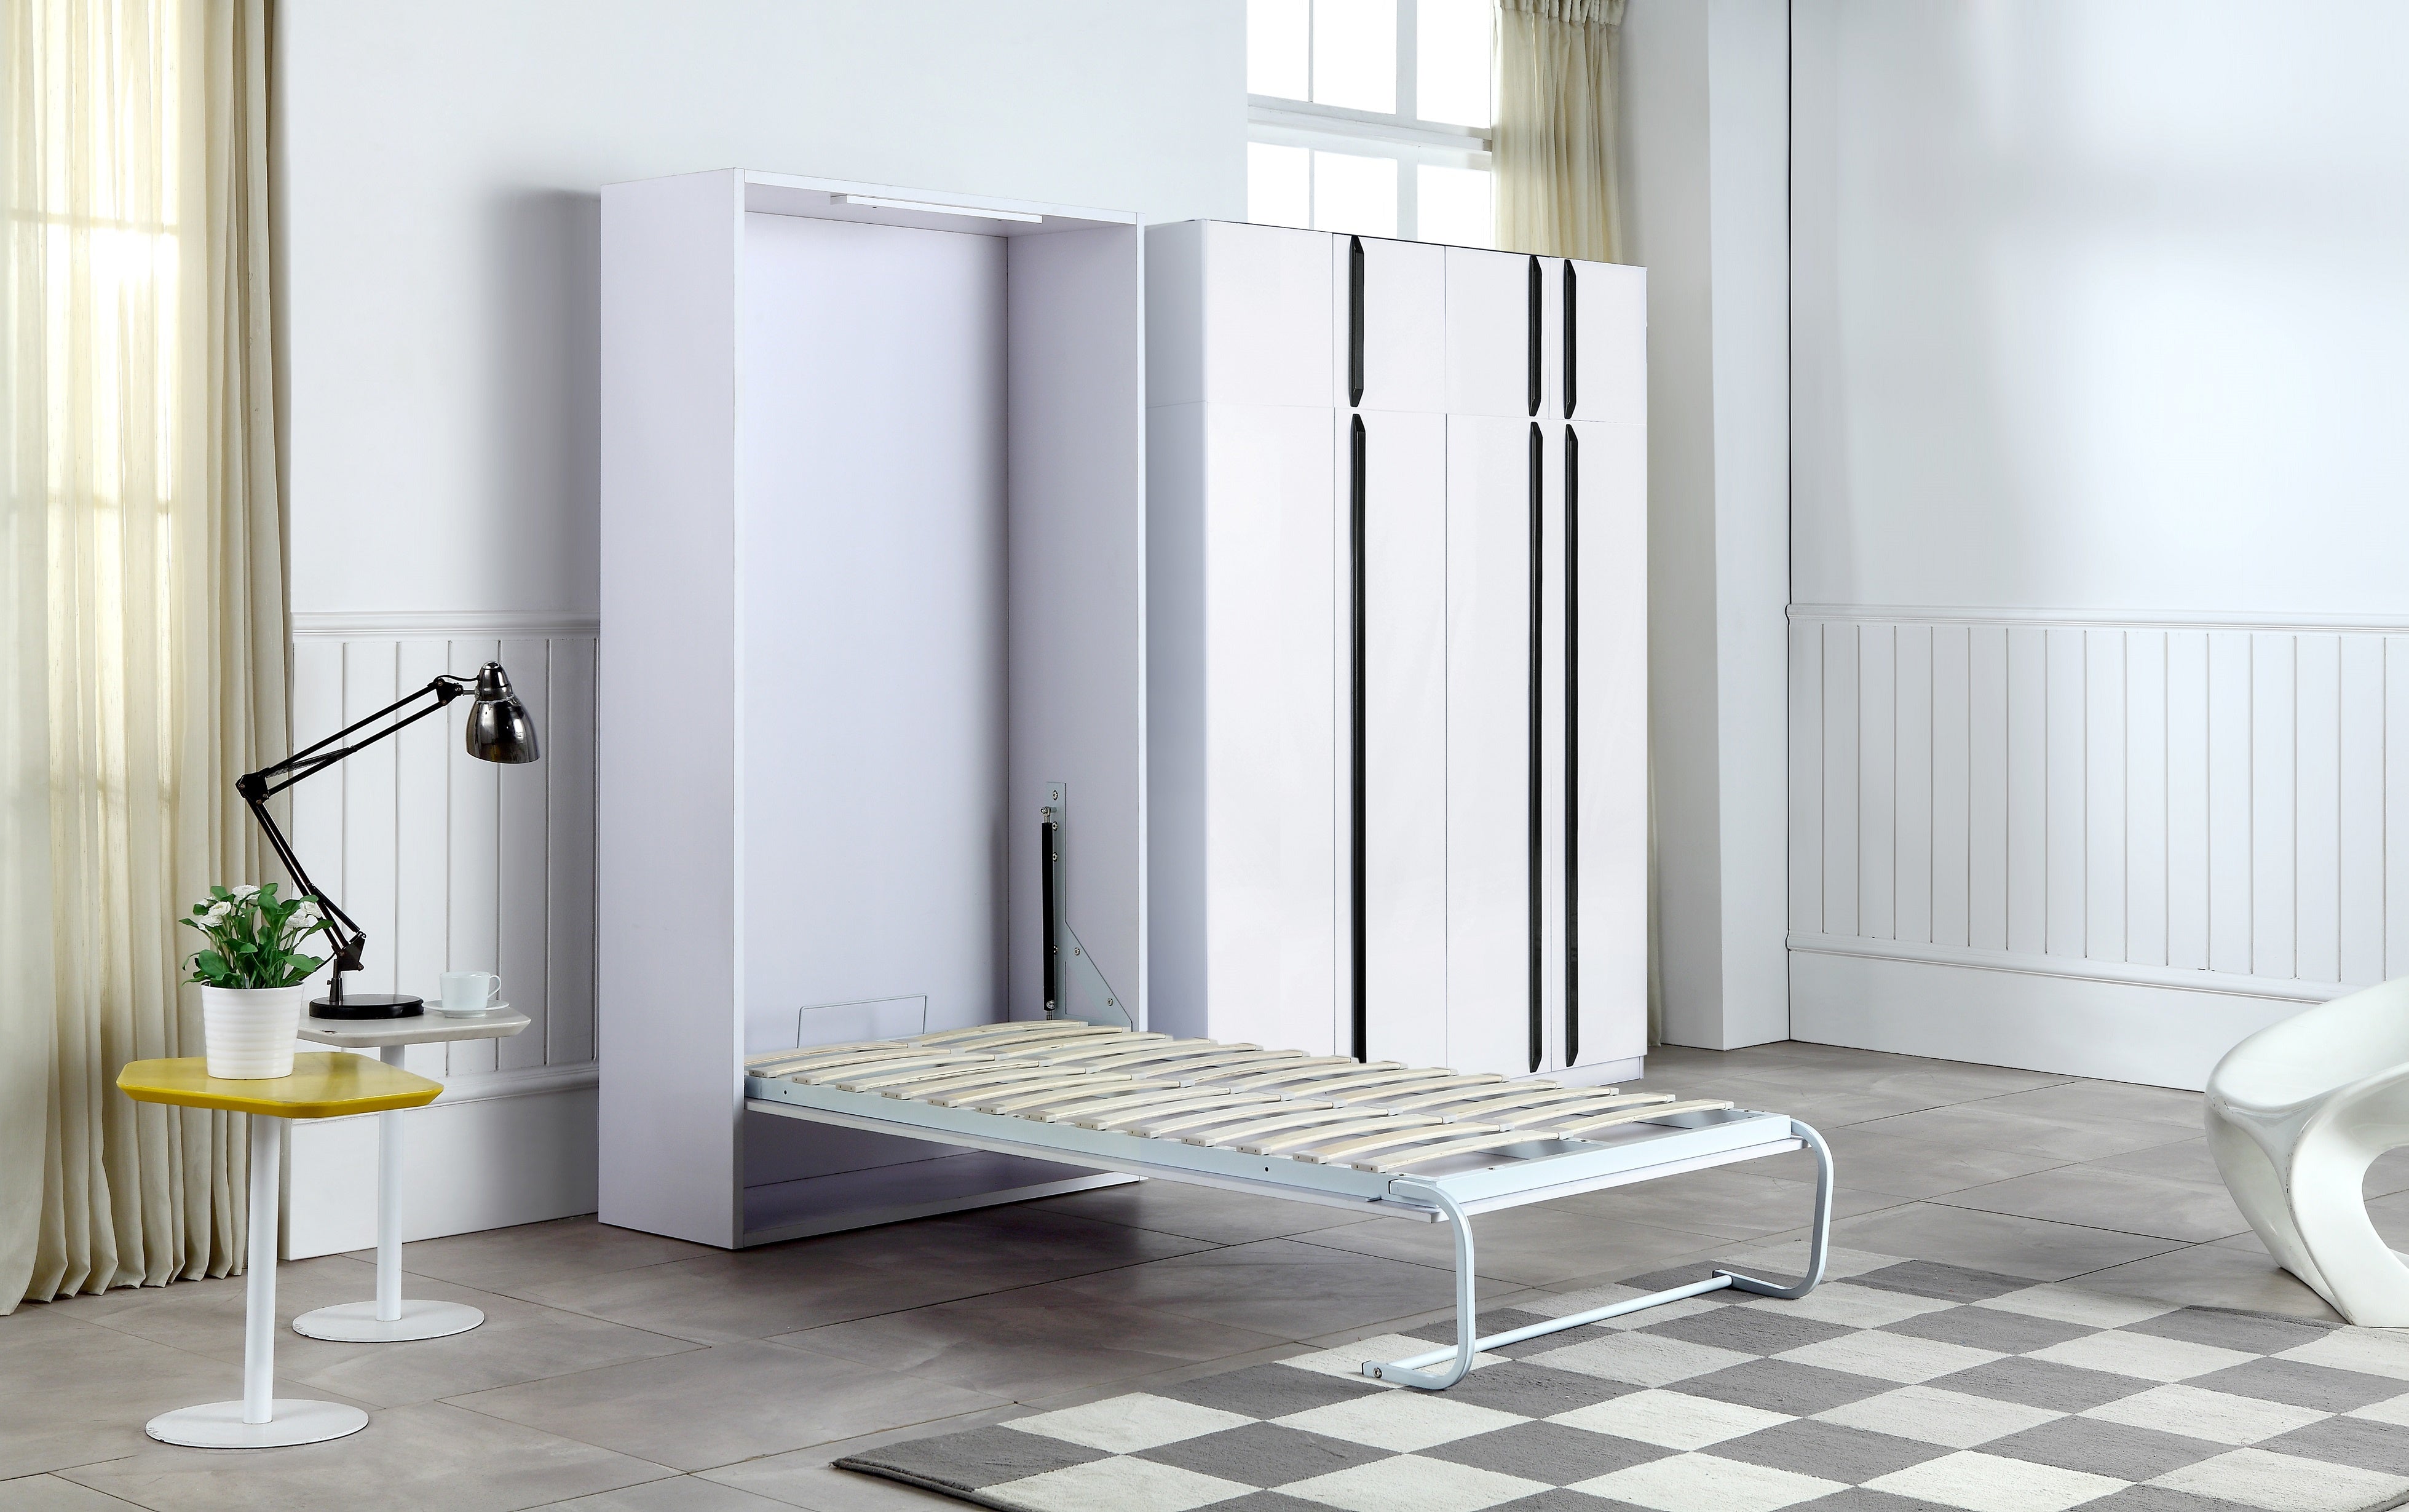 Palermo Single Size Wall Bed